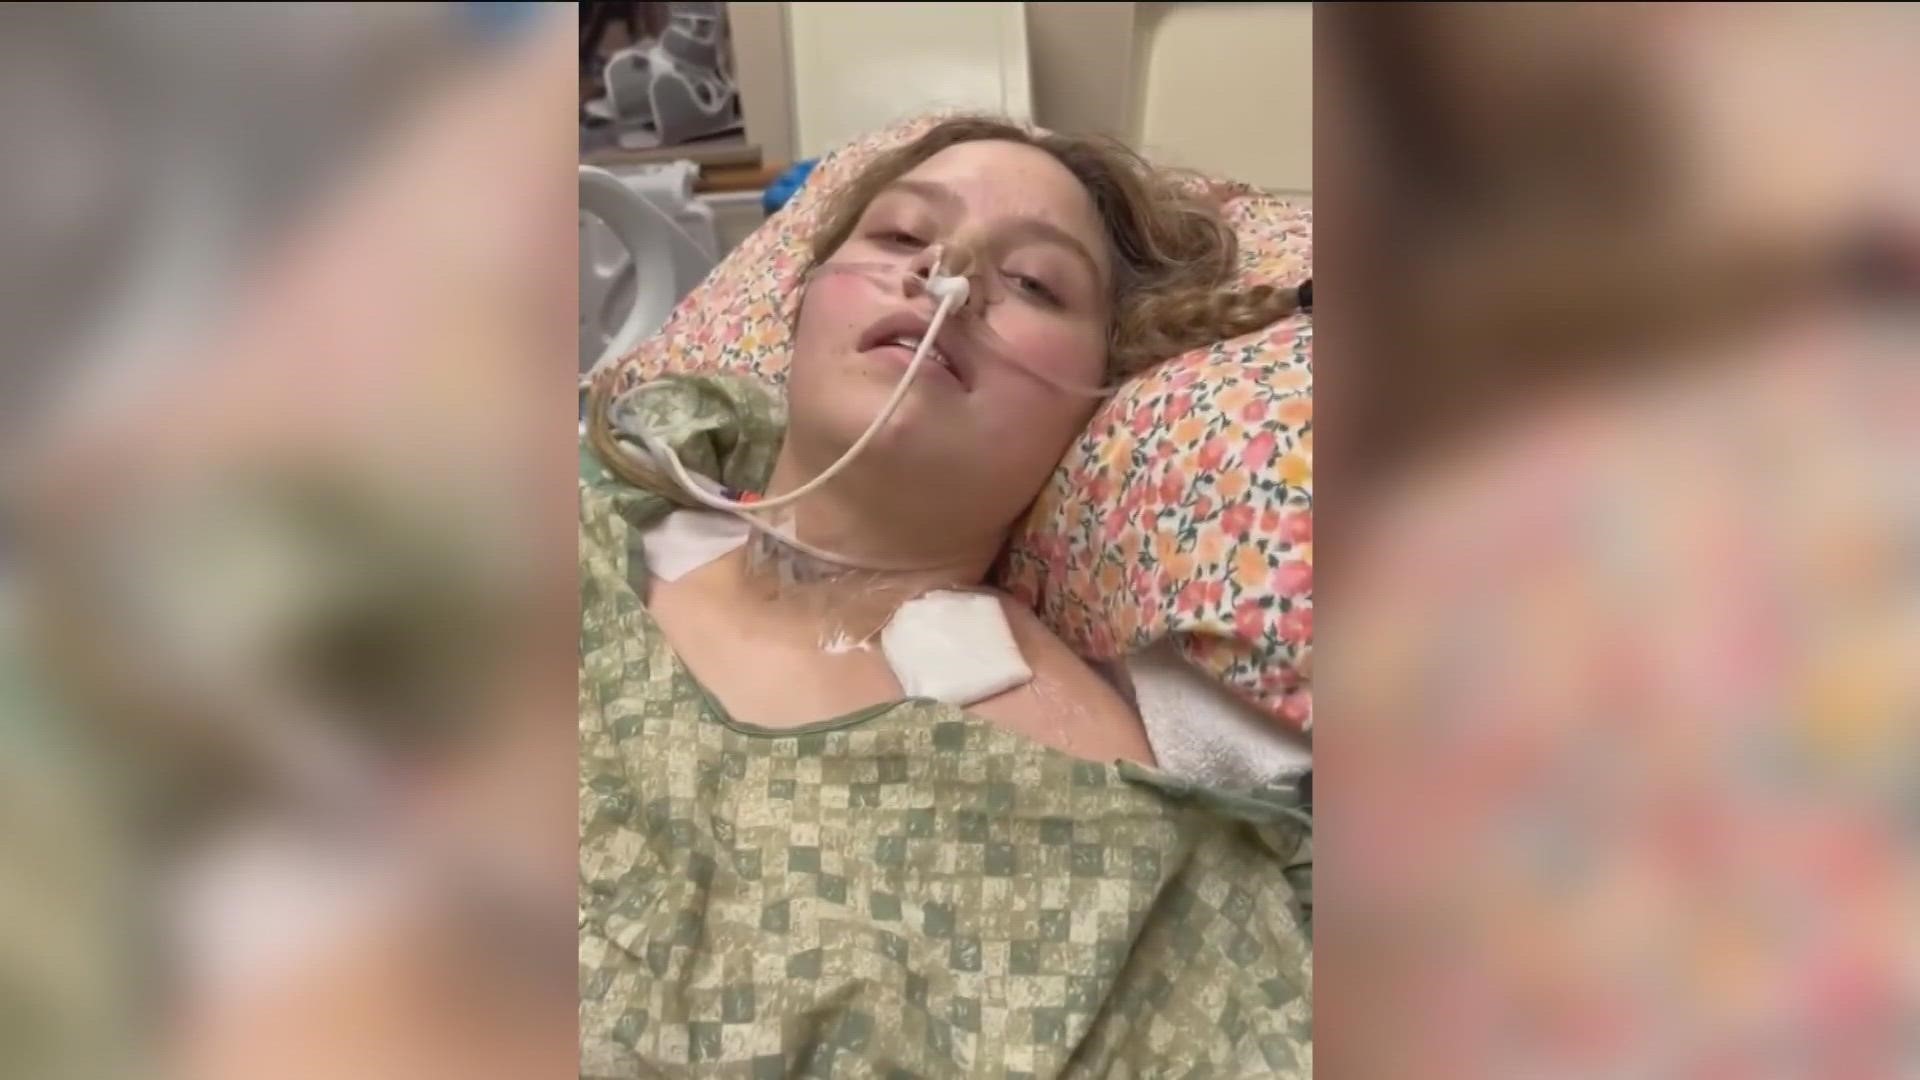 After a car accident Jan. 6, 2023, in Star, Idaho, Kayla Schmidt is fighting to regain movement as she recovers at a Utah hospital.